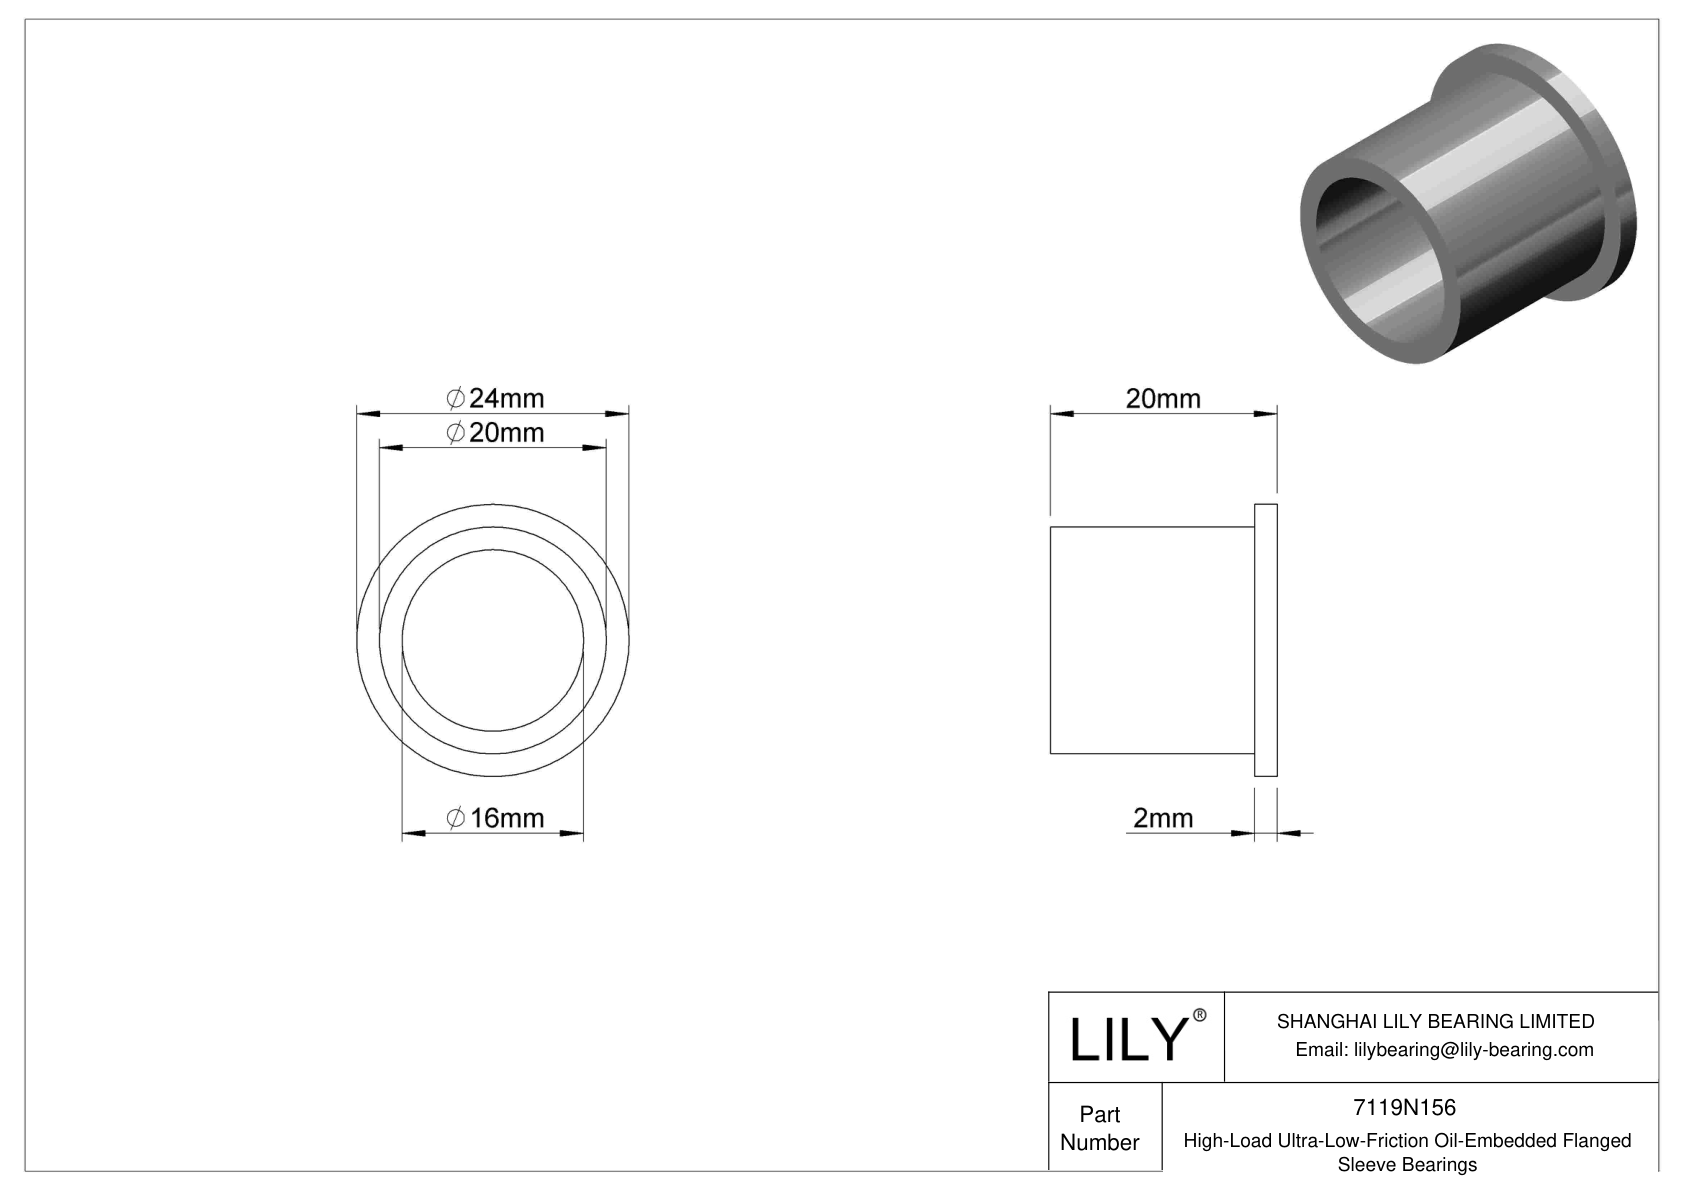 HBBJNBFG High-Load Ultra-Low-Friction Oil-Embedded Flanged Sleeve Bearings cad drawing